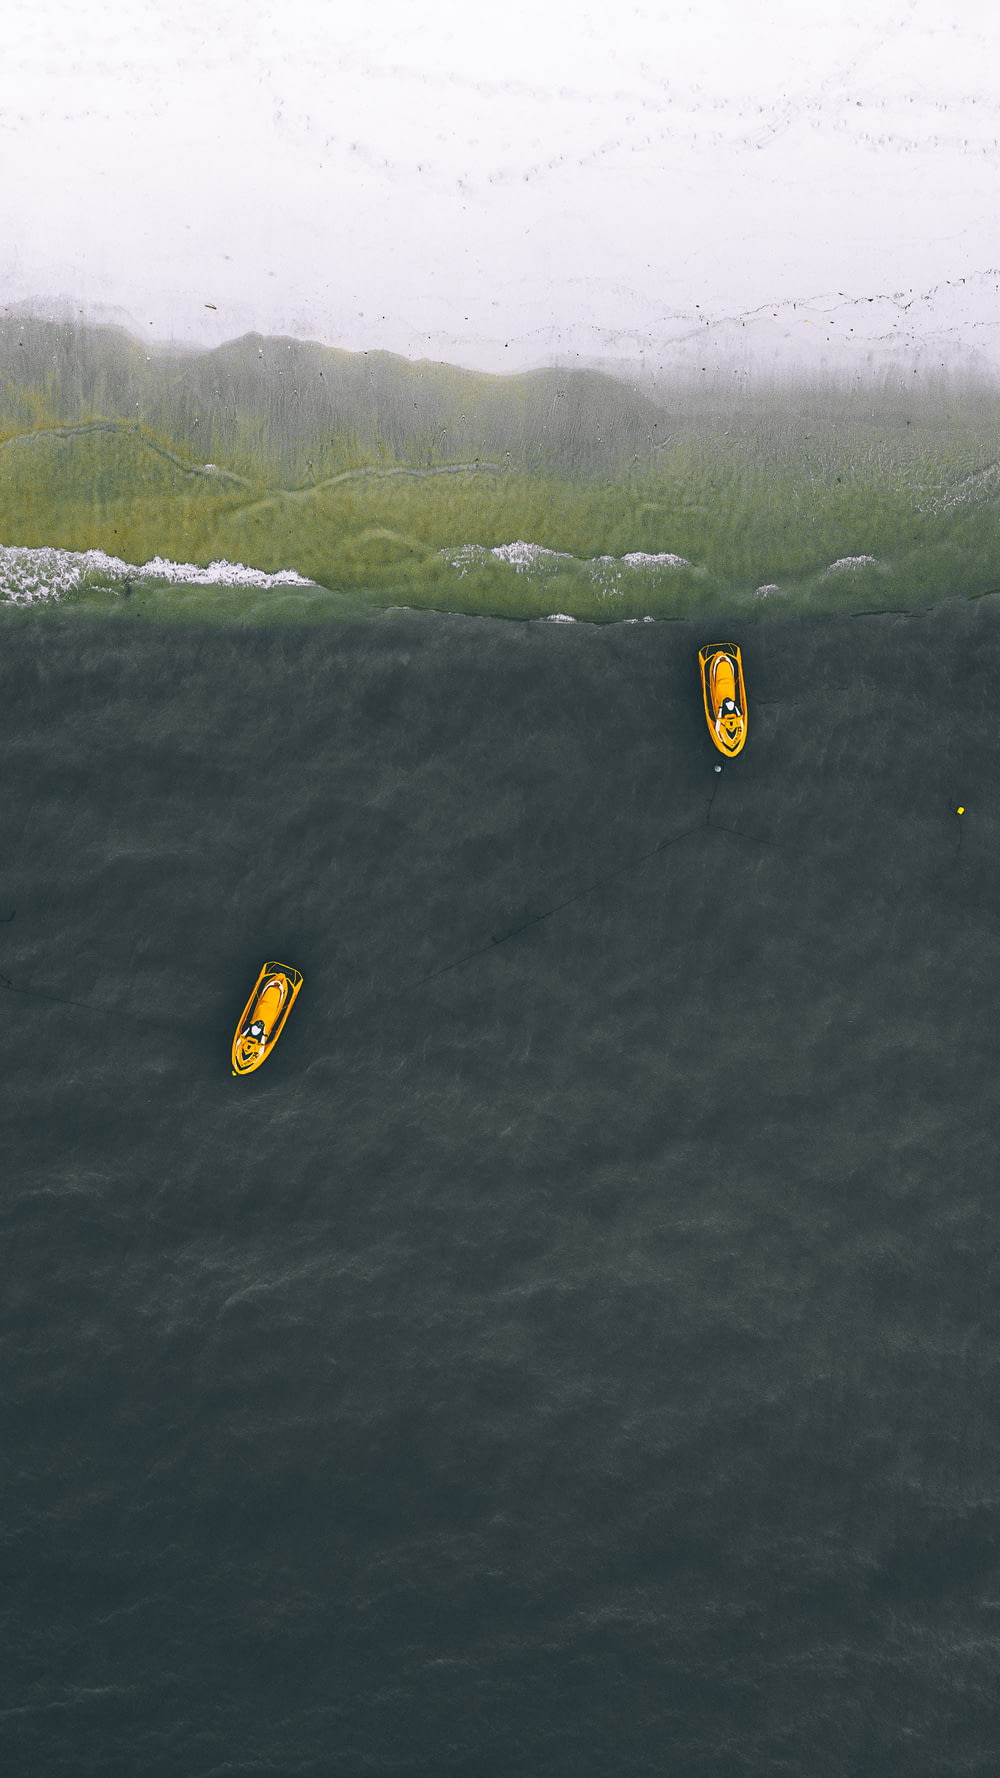 two yellow personal watercraft on water